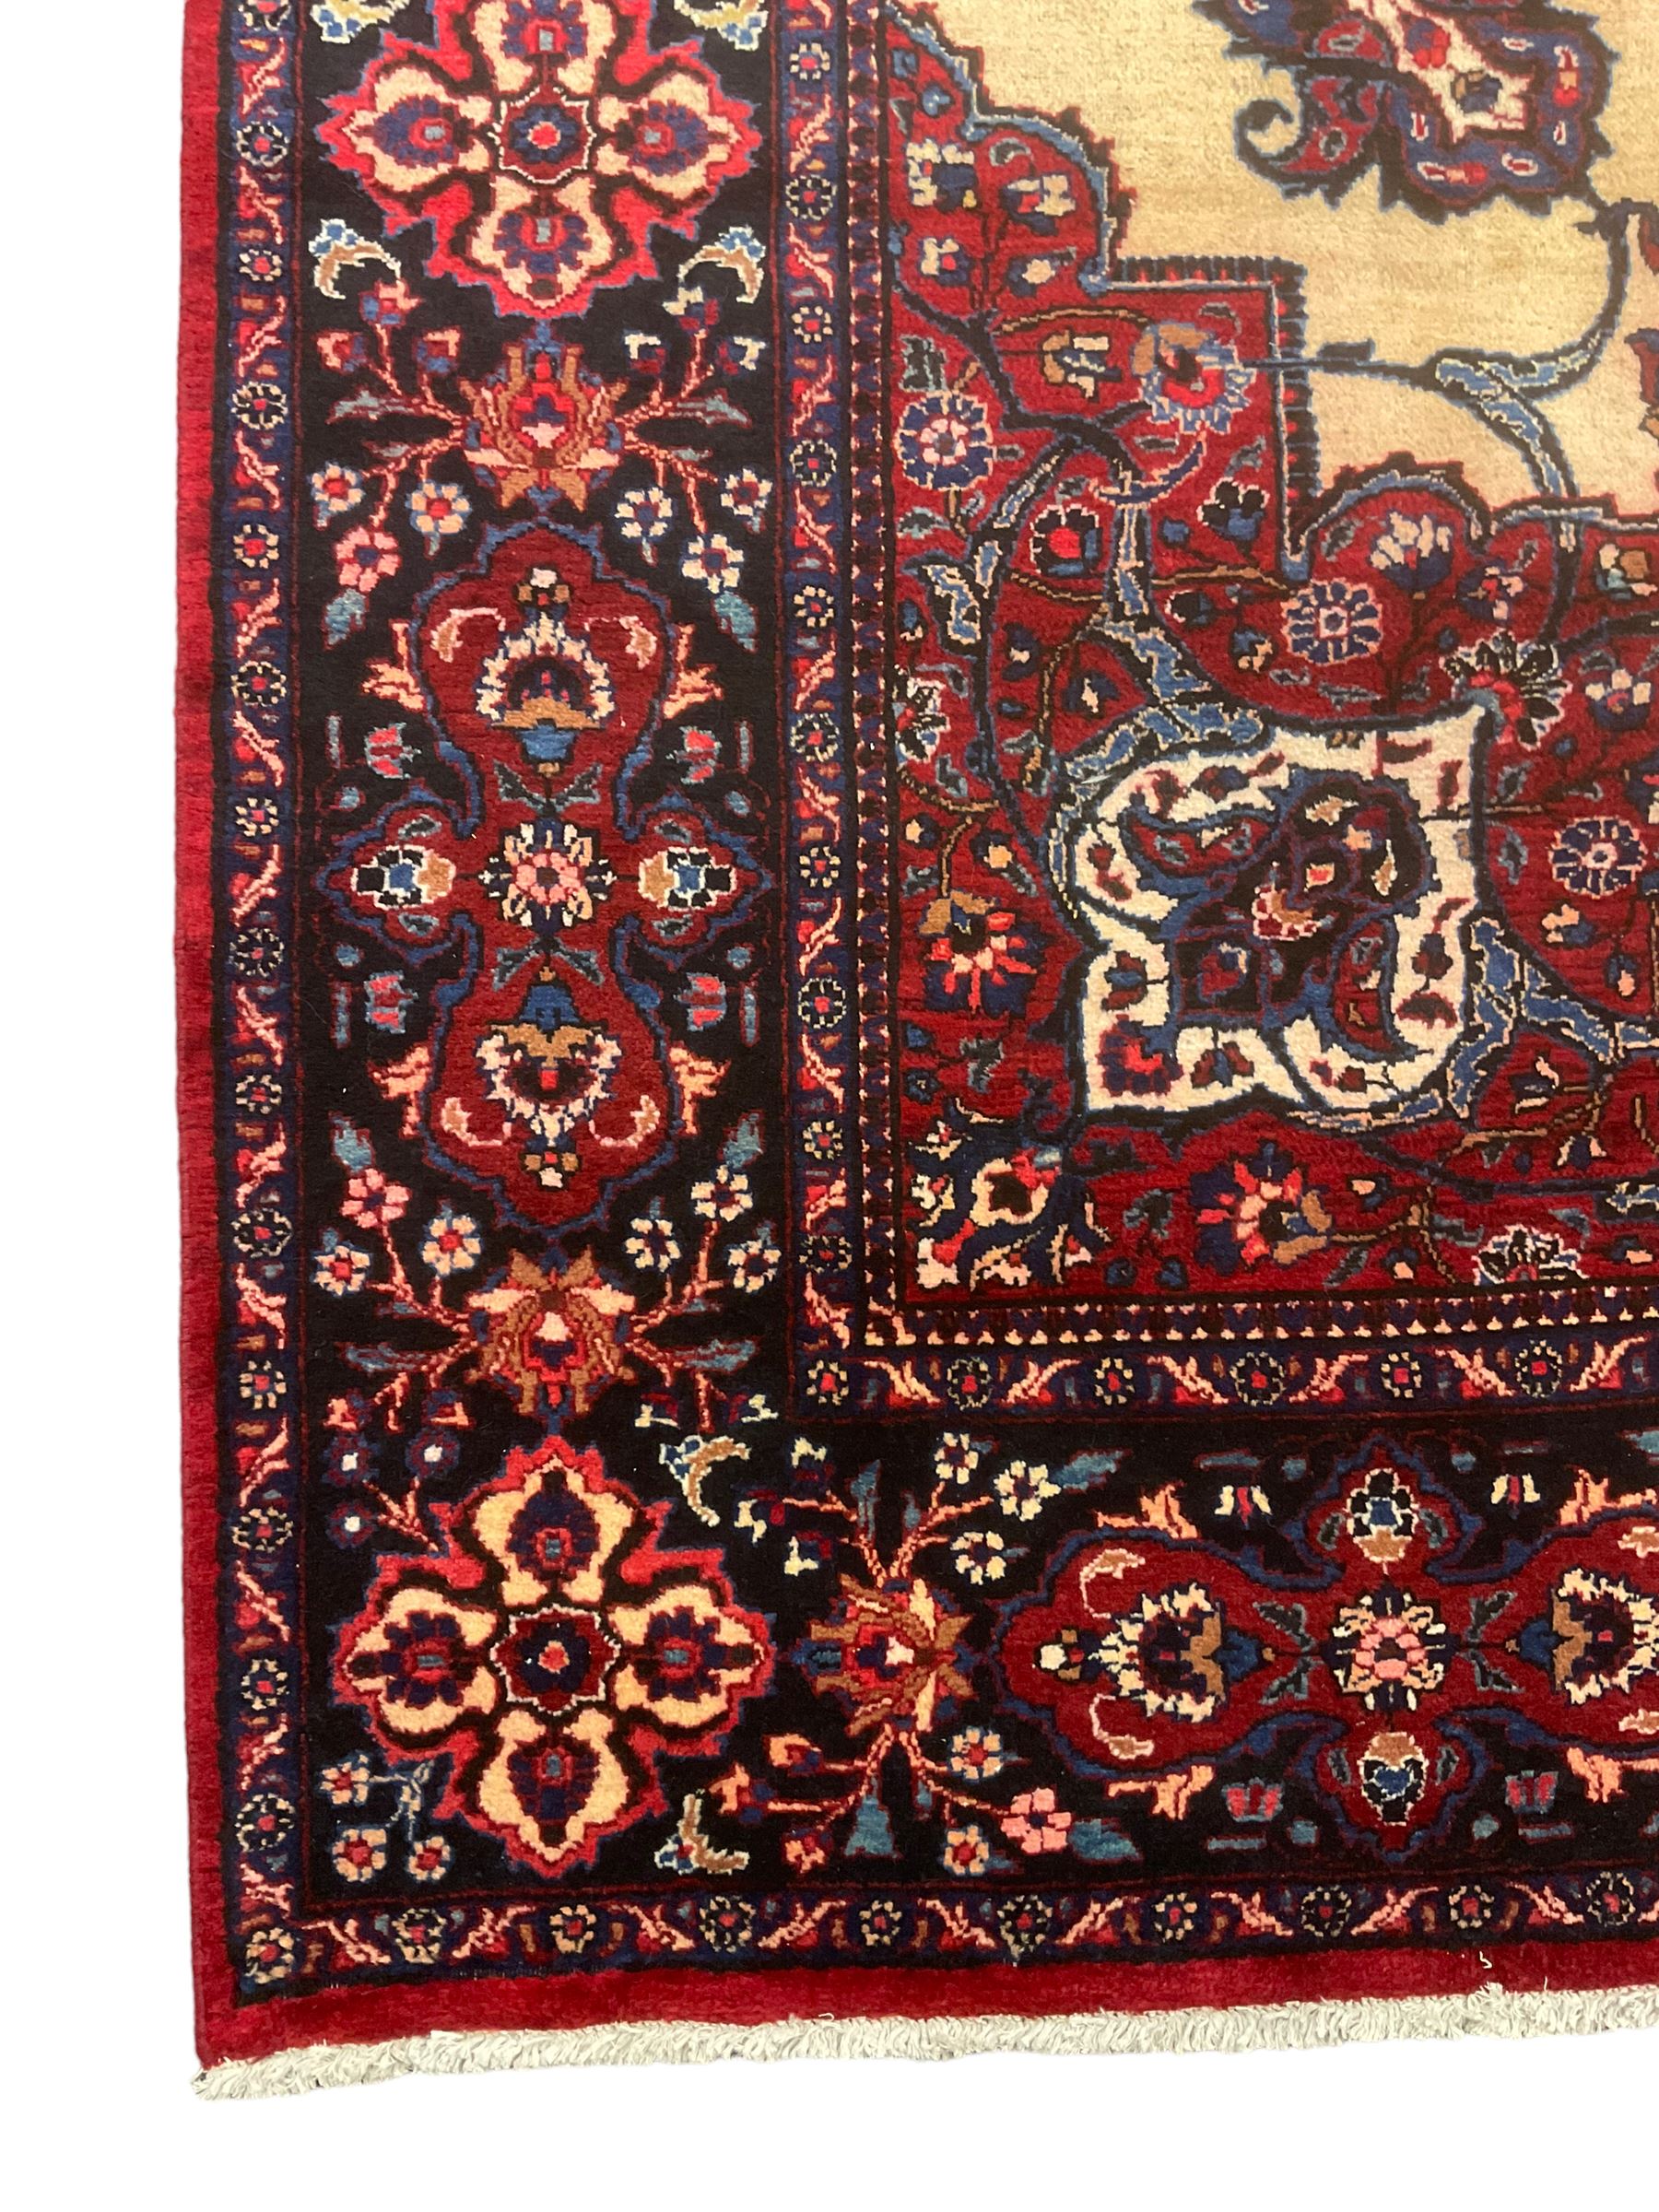 North East Persian Meshed carpet - Image 2 of 8